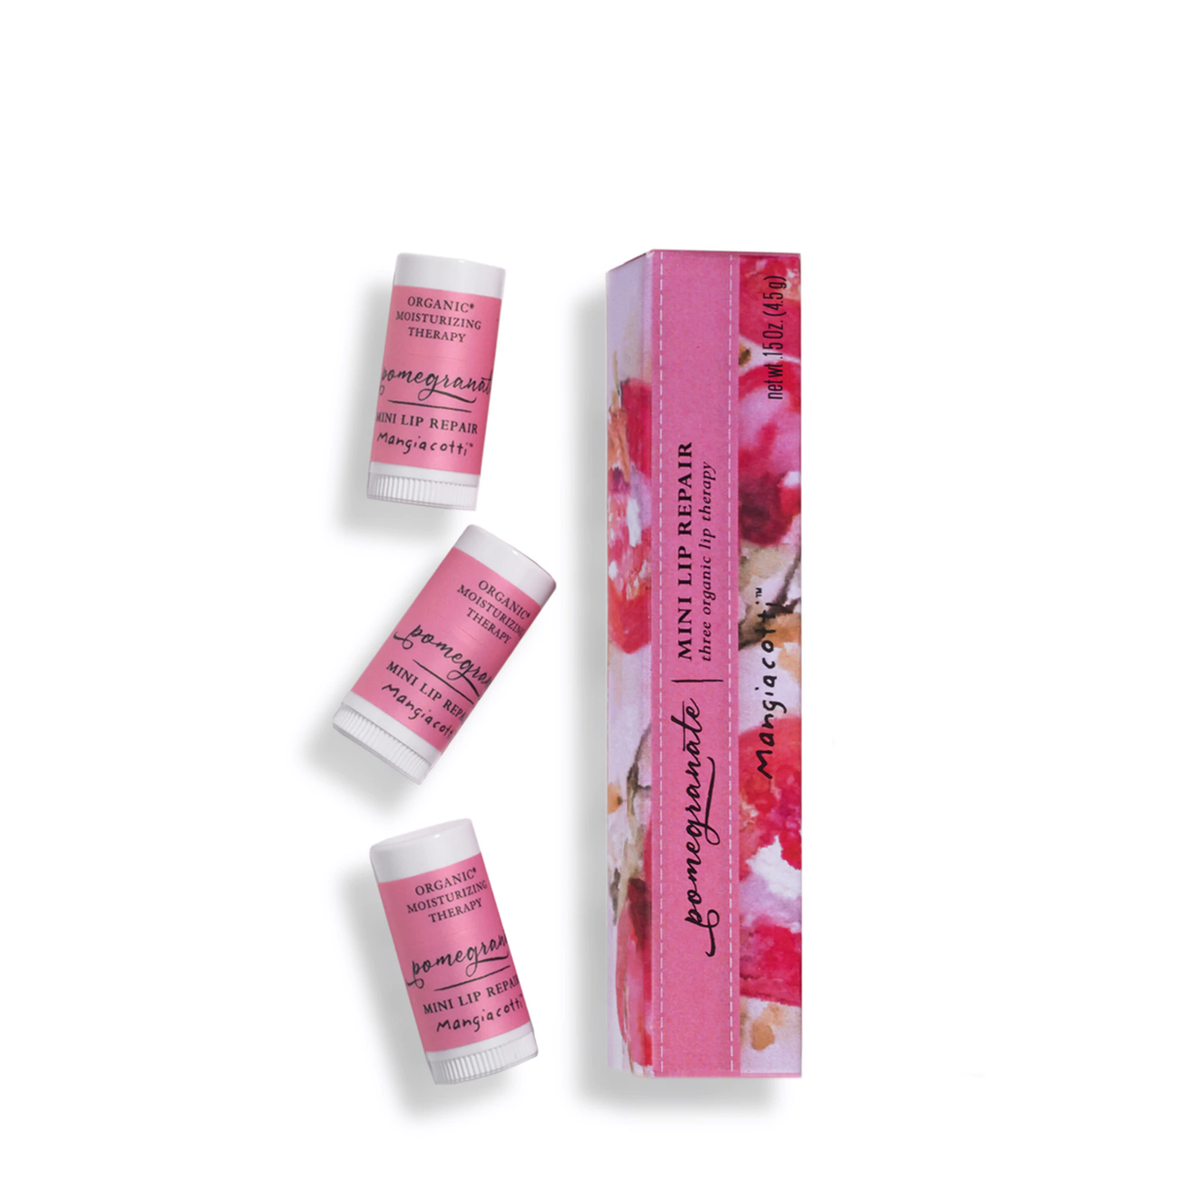 Three floral-printed Mangiacotti Pomegranate Mini Lip Repair tubes and a box, isolated on a white background. The products are labeled with organic and rejuvenating qualities.